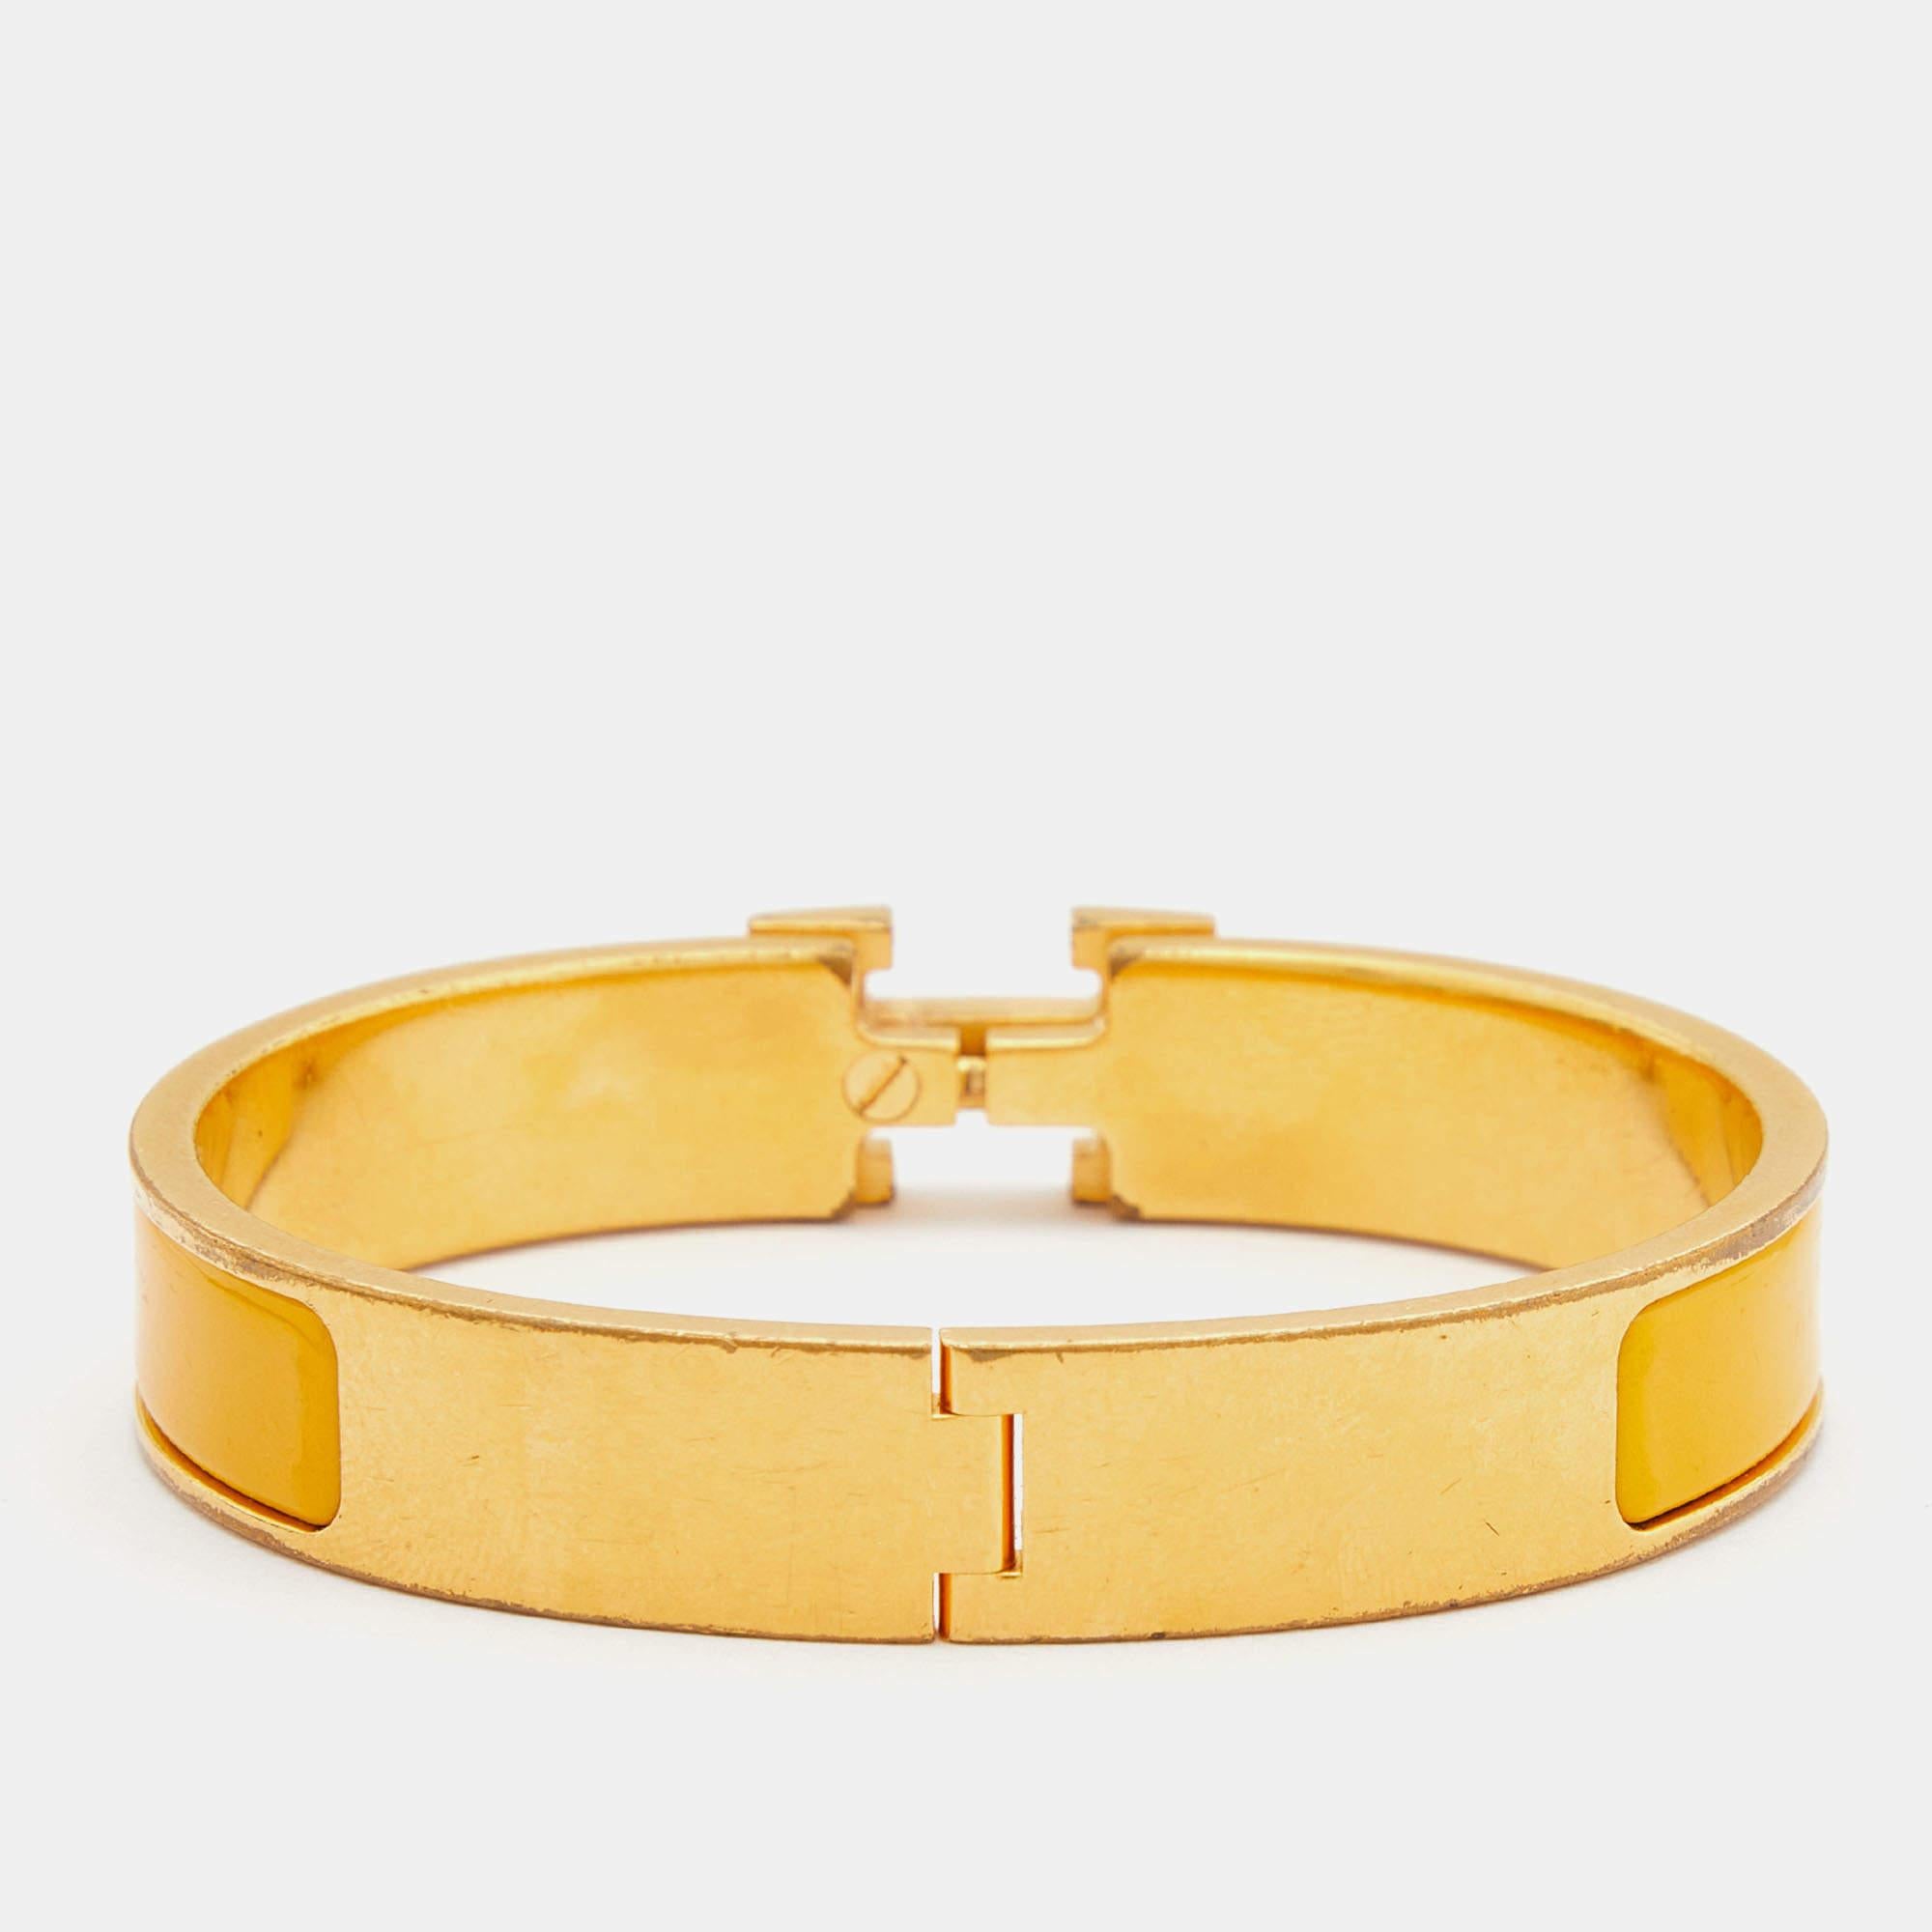 This bracelet embodies Hermès’ elegant craftsmanship with its gold-plated metal body and enamel inlay. Featuring the iconic H logo of the fashion house at the front, this bracelet is the accessory to buy today!

